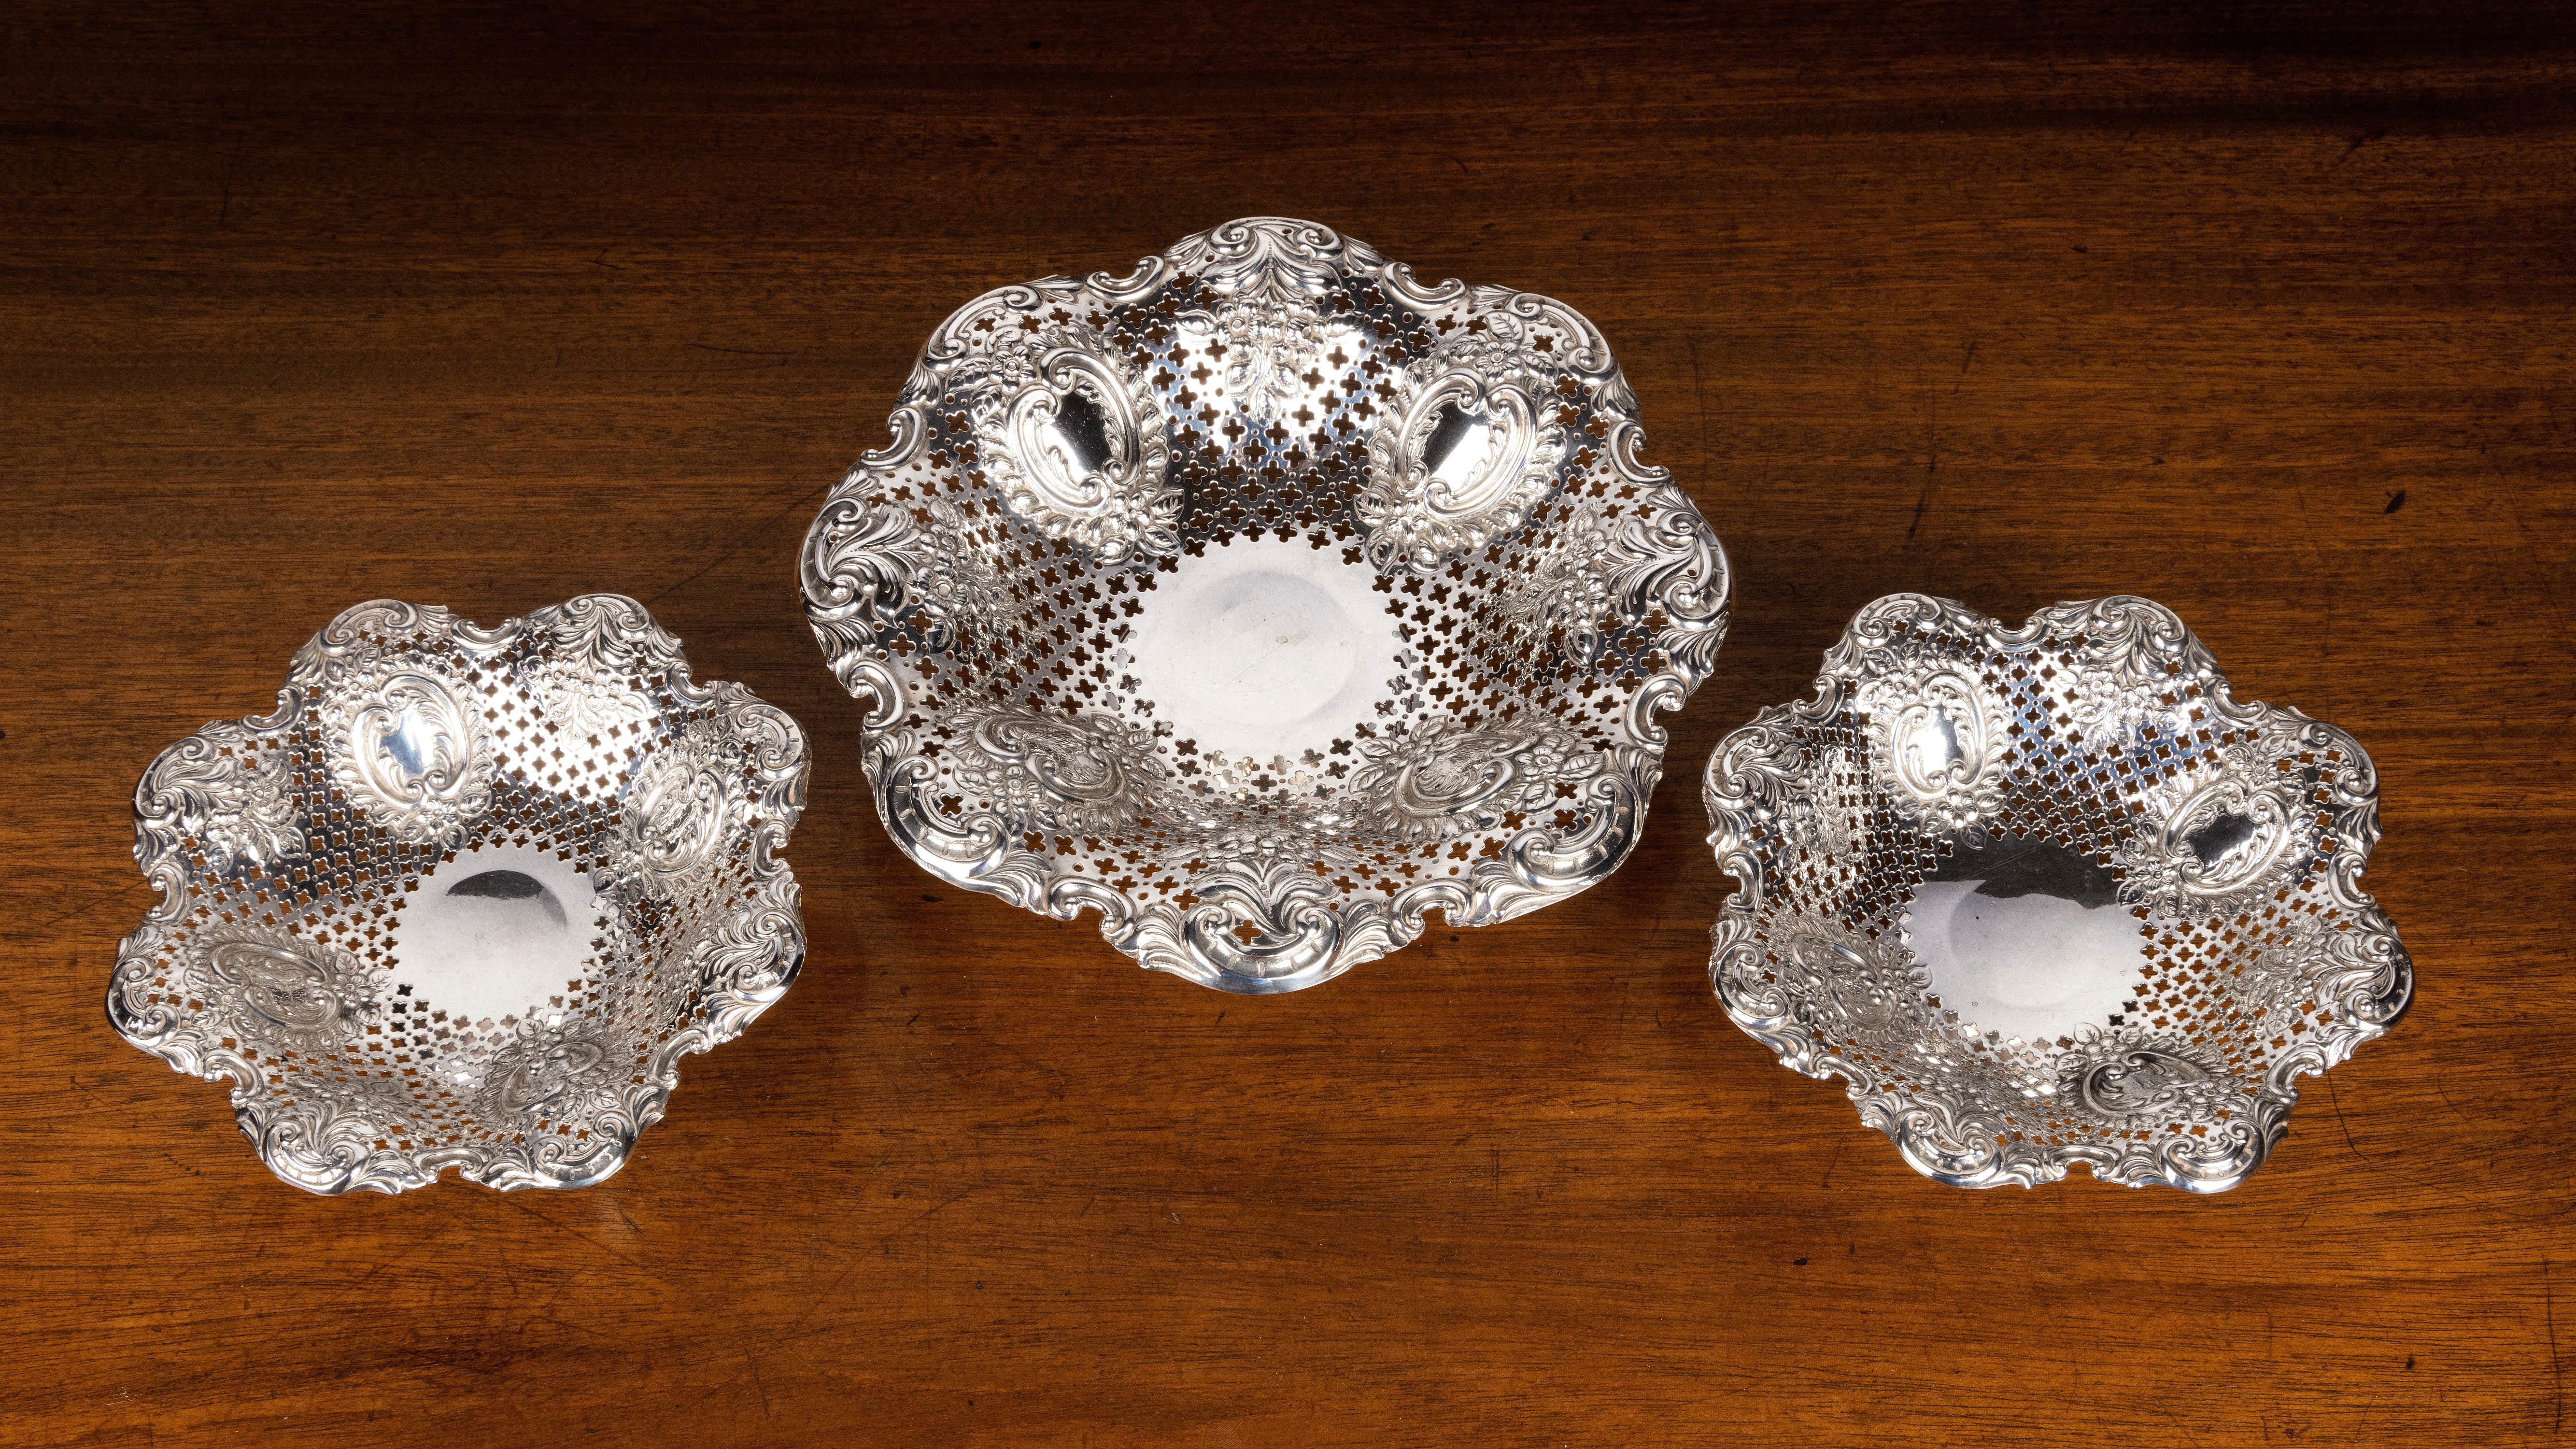 A most attractive suite of three silver pierced and fluted dishes. 1896 and 1897. Elaborately pierced repousse borders with oval reserved panels. 
 
Measures: 2 dishes x height 2 inches x diameter 6 inches 132.6 grams = 4.3 troy ounces
1 dish x